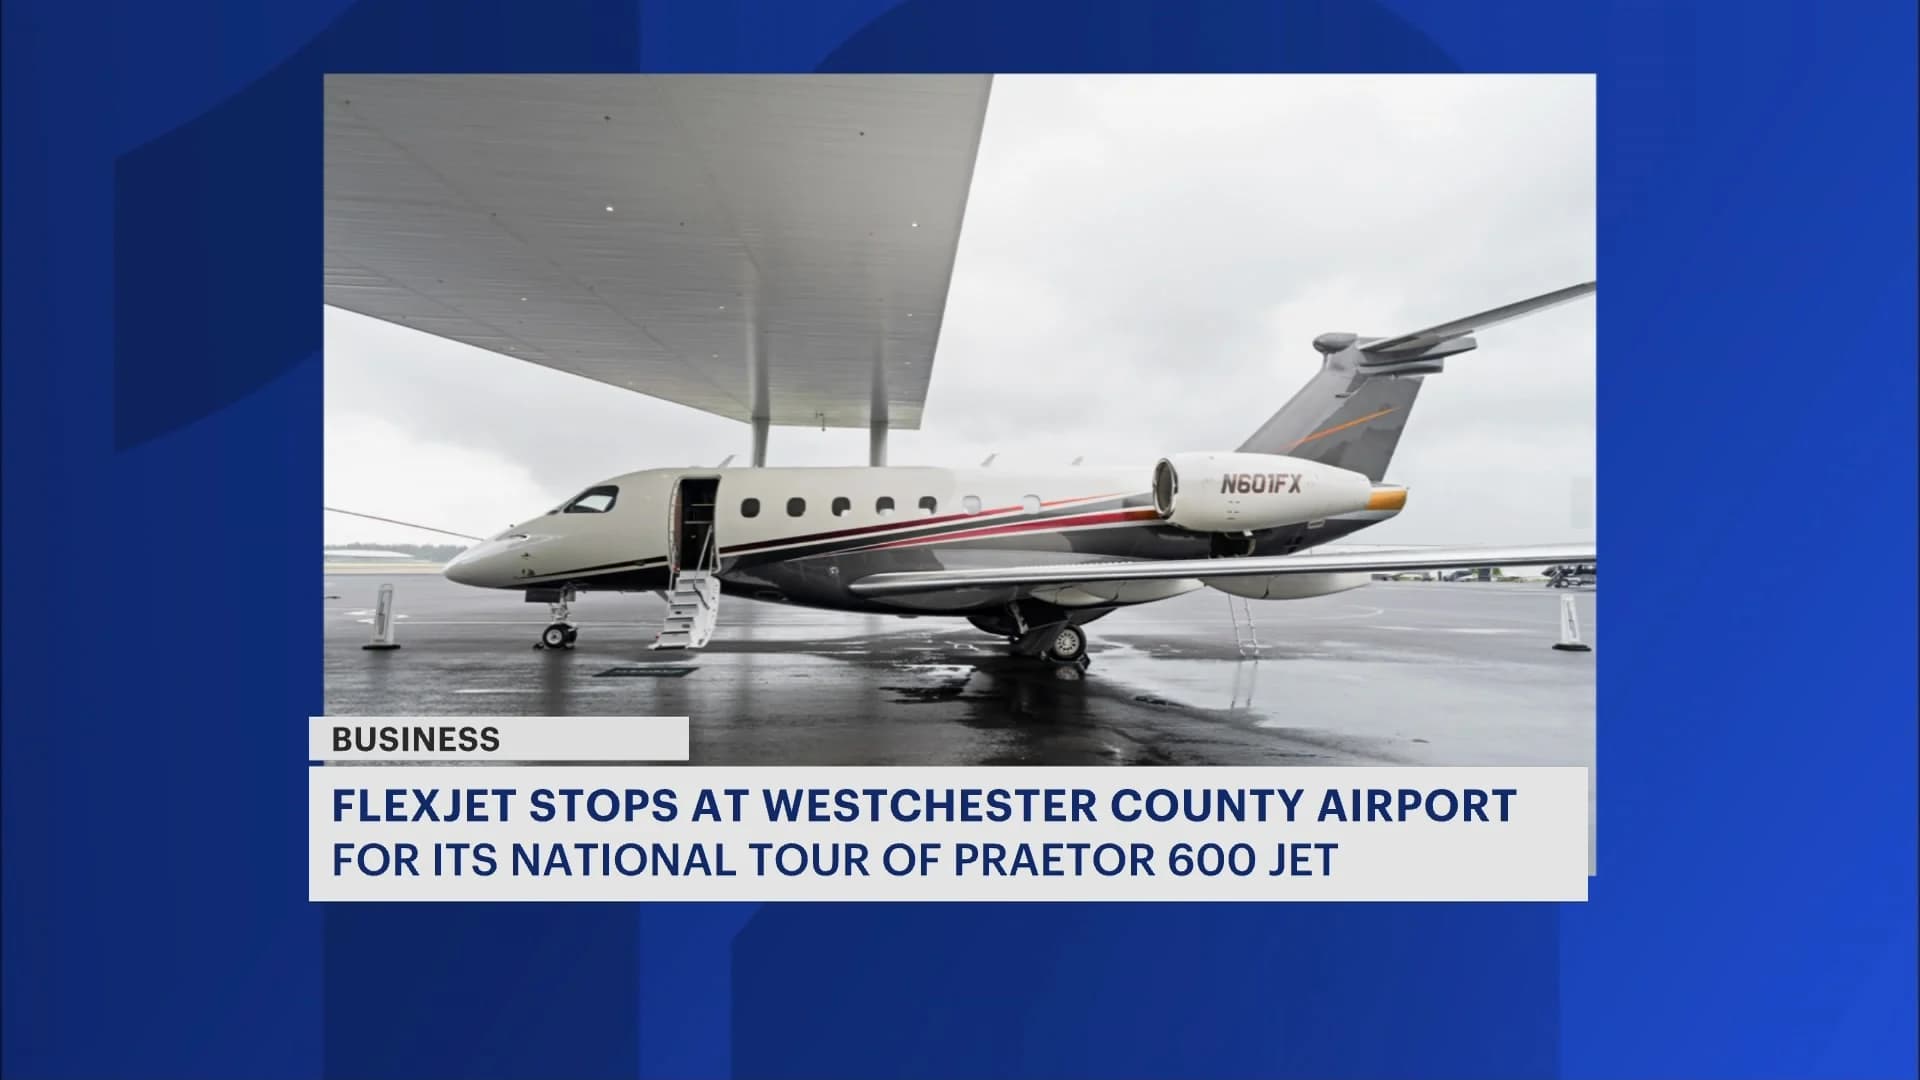 Flexjet launches new mid-sized jet at Westchester County Airport